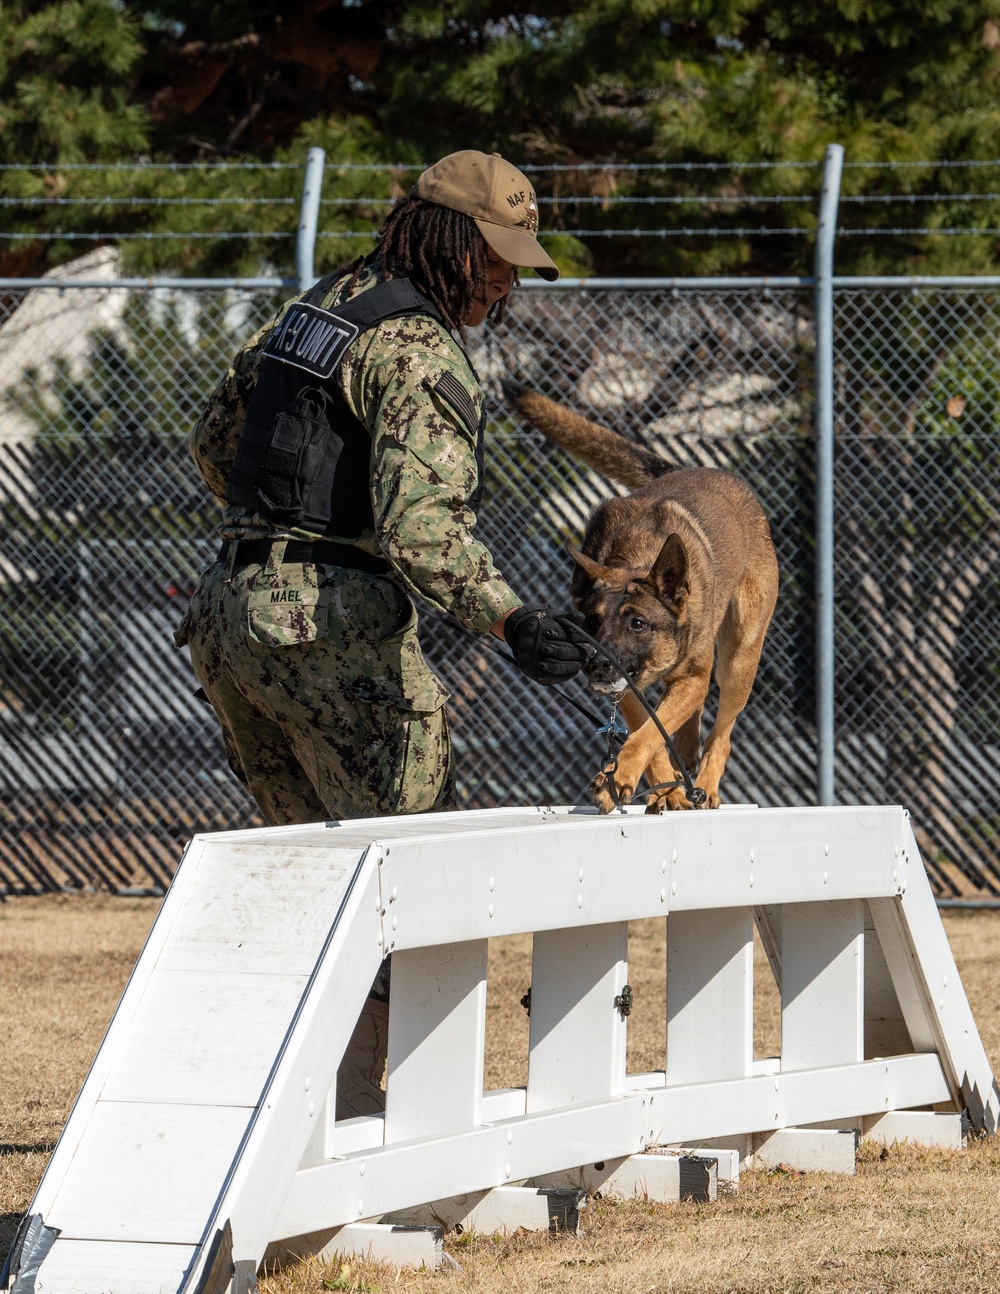 NAF Atsugi Military Working Dogs Demonstrate Obedience Training